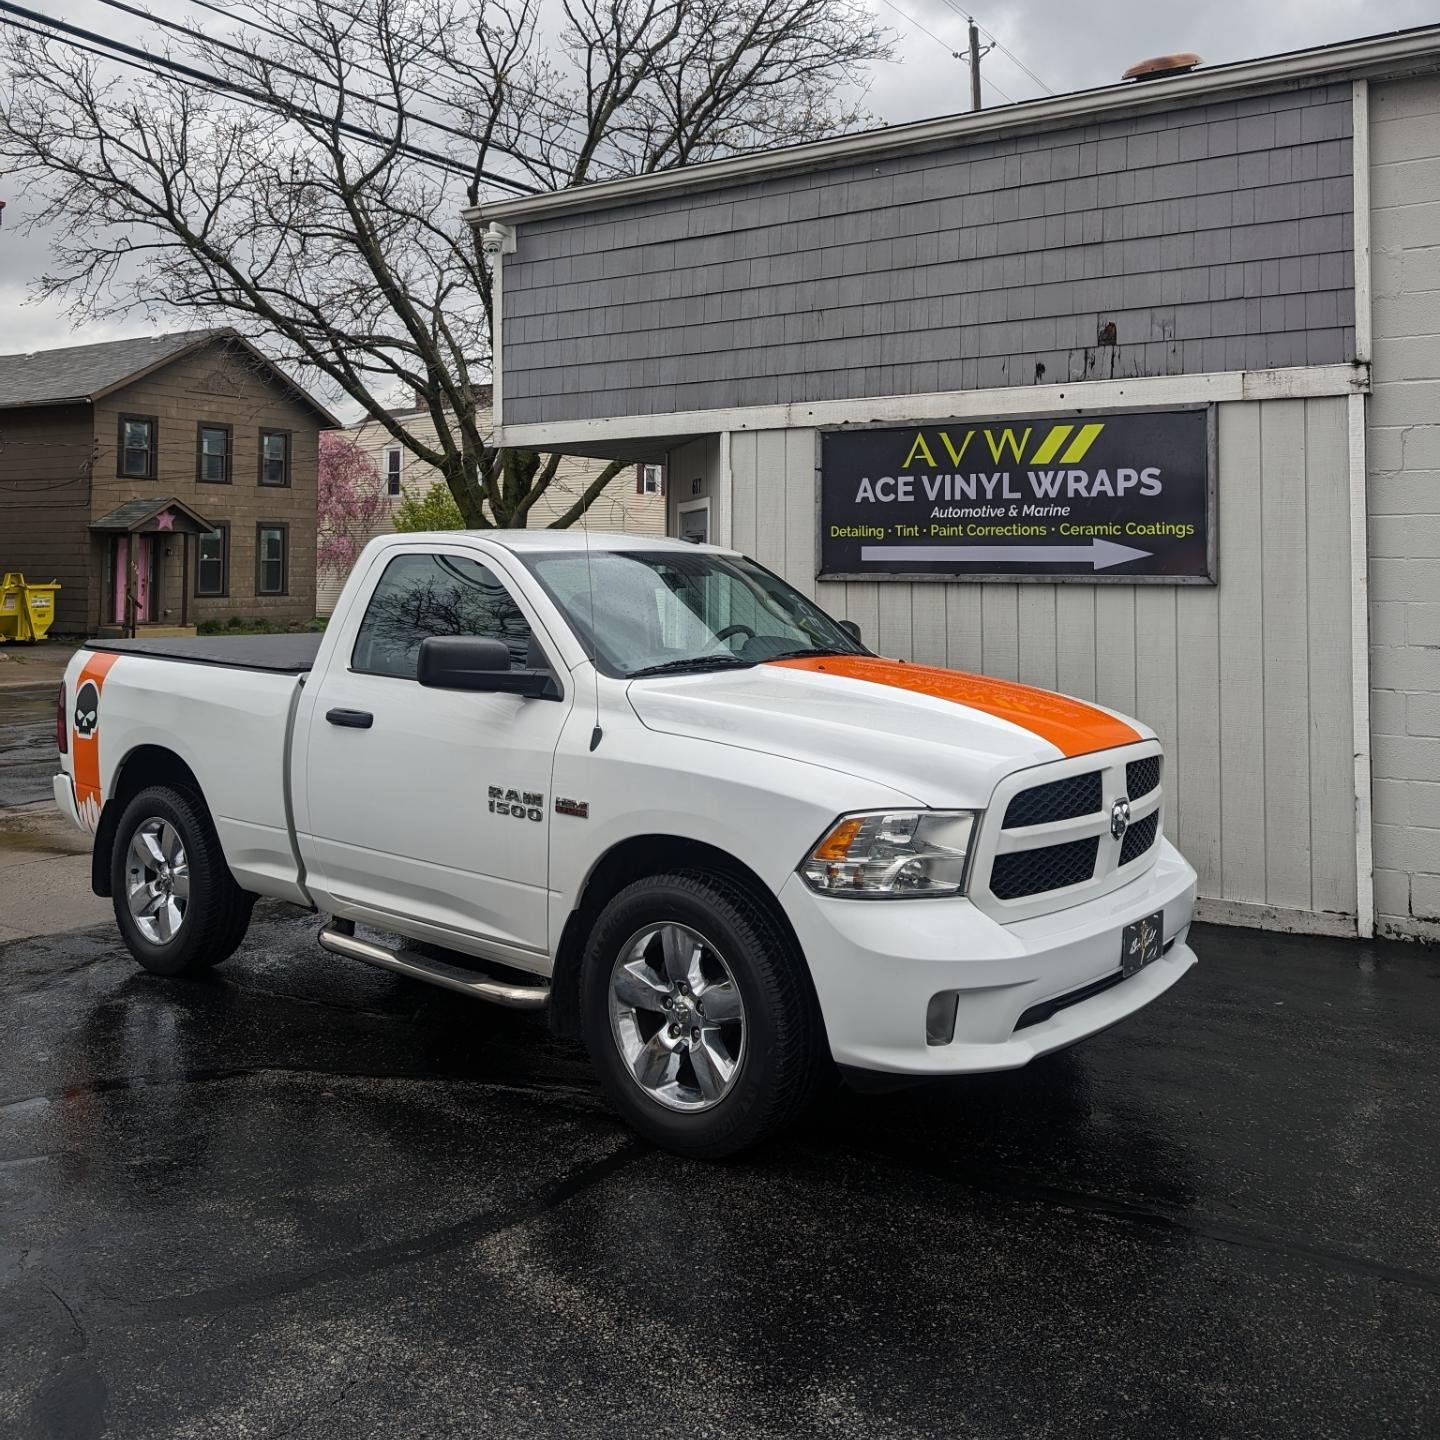 Custom Willie G Harley Decals for this Dodge Ram 1500. Customer can now haul his Harleys down south in style while matching the bikes 😎
He will be returning next month for a full exterior polish and sealant